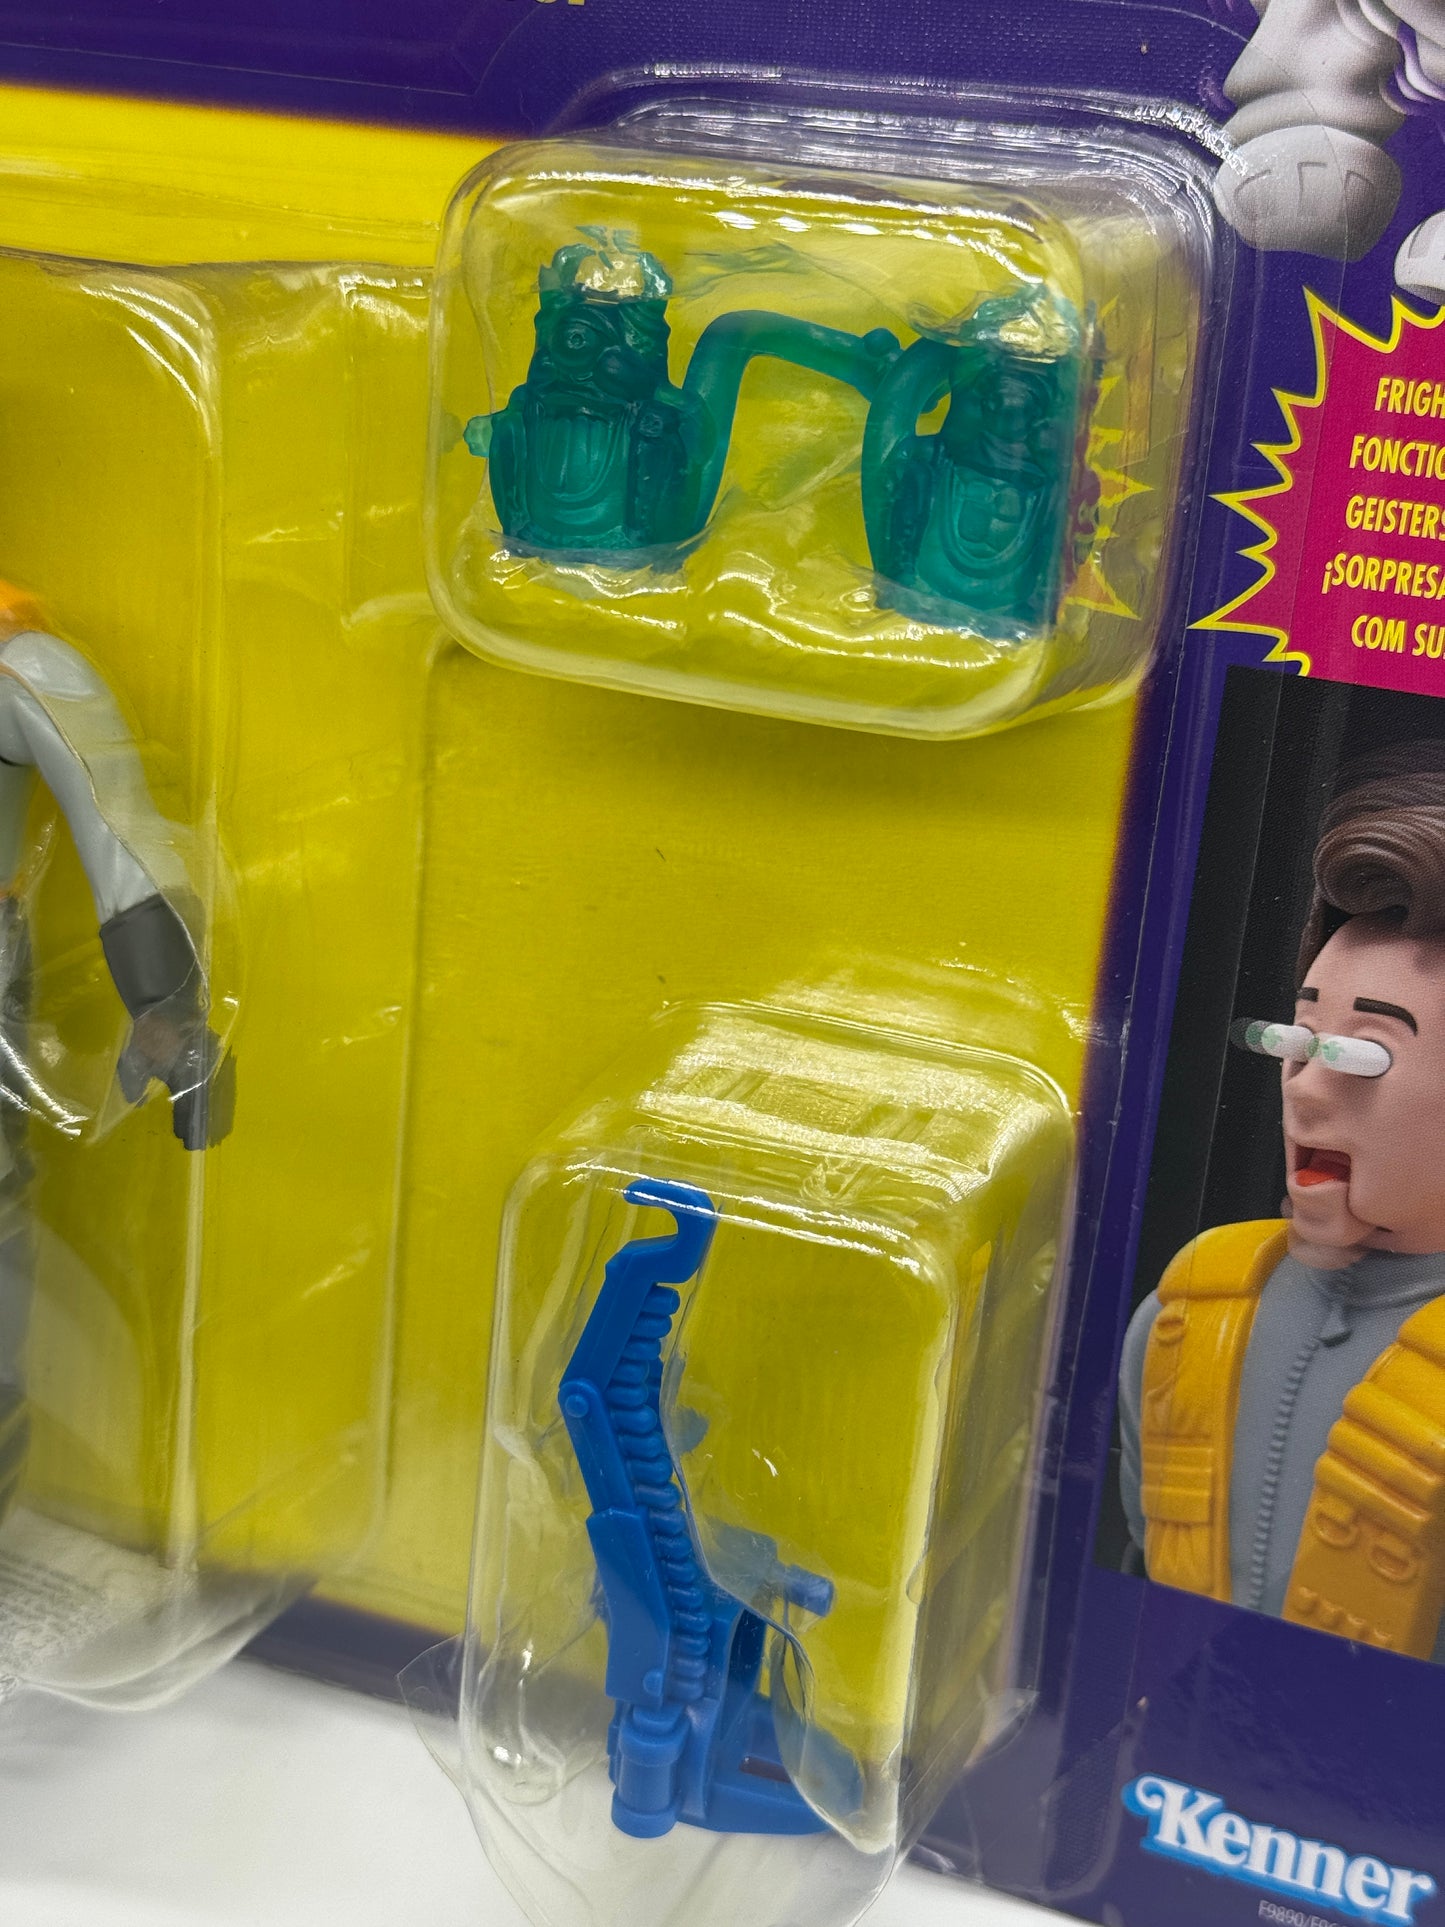 The Real Ghostbusters "Peter Venkman & Gruesome Twosome Ghost" Fright Features (2024)